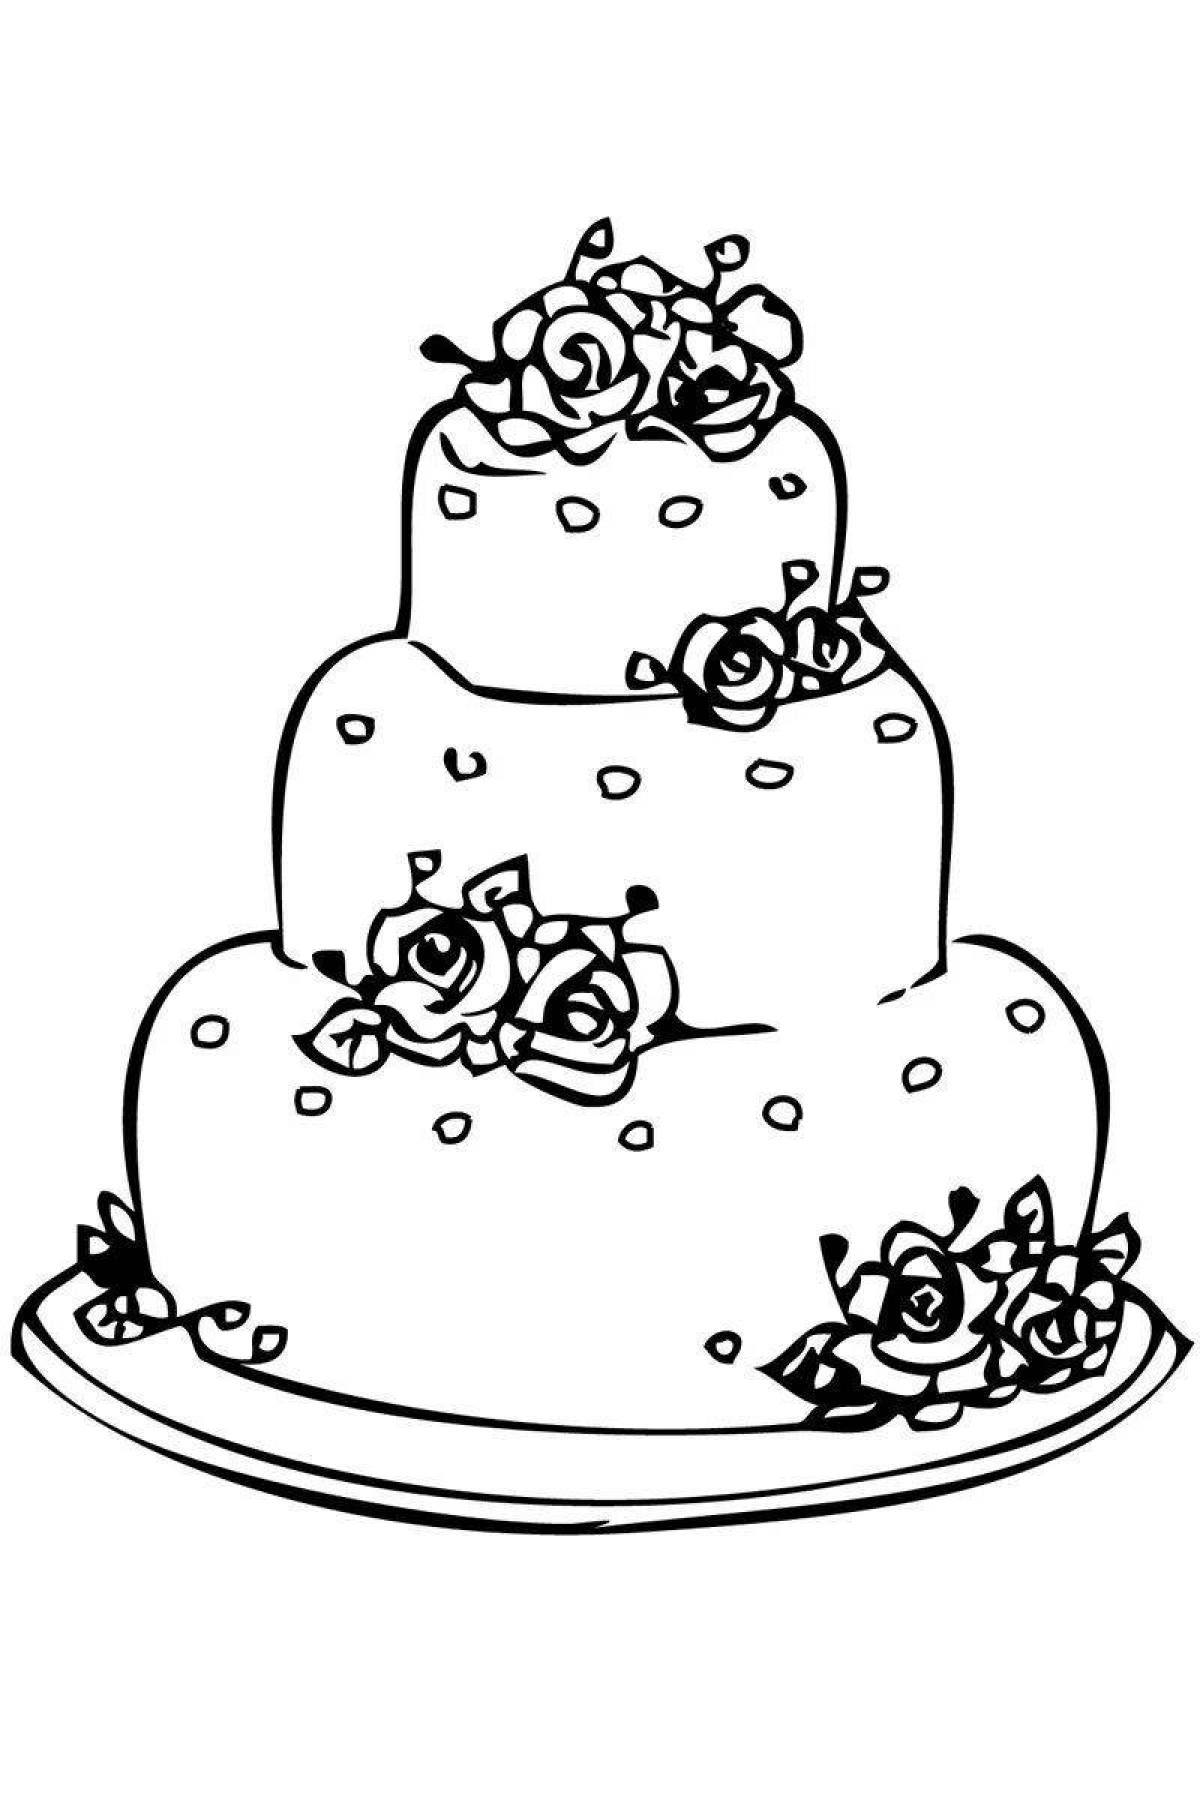 Animated drawing of a cake for children